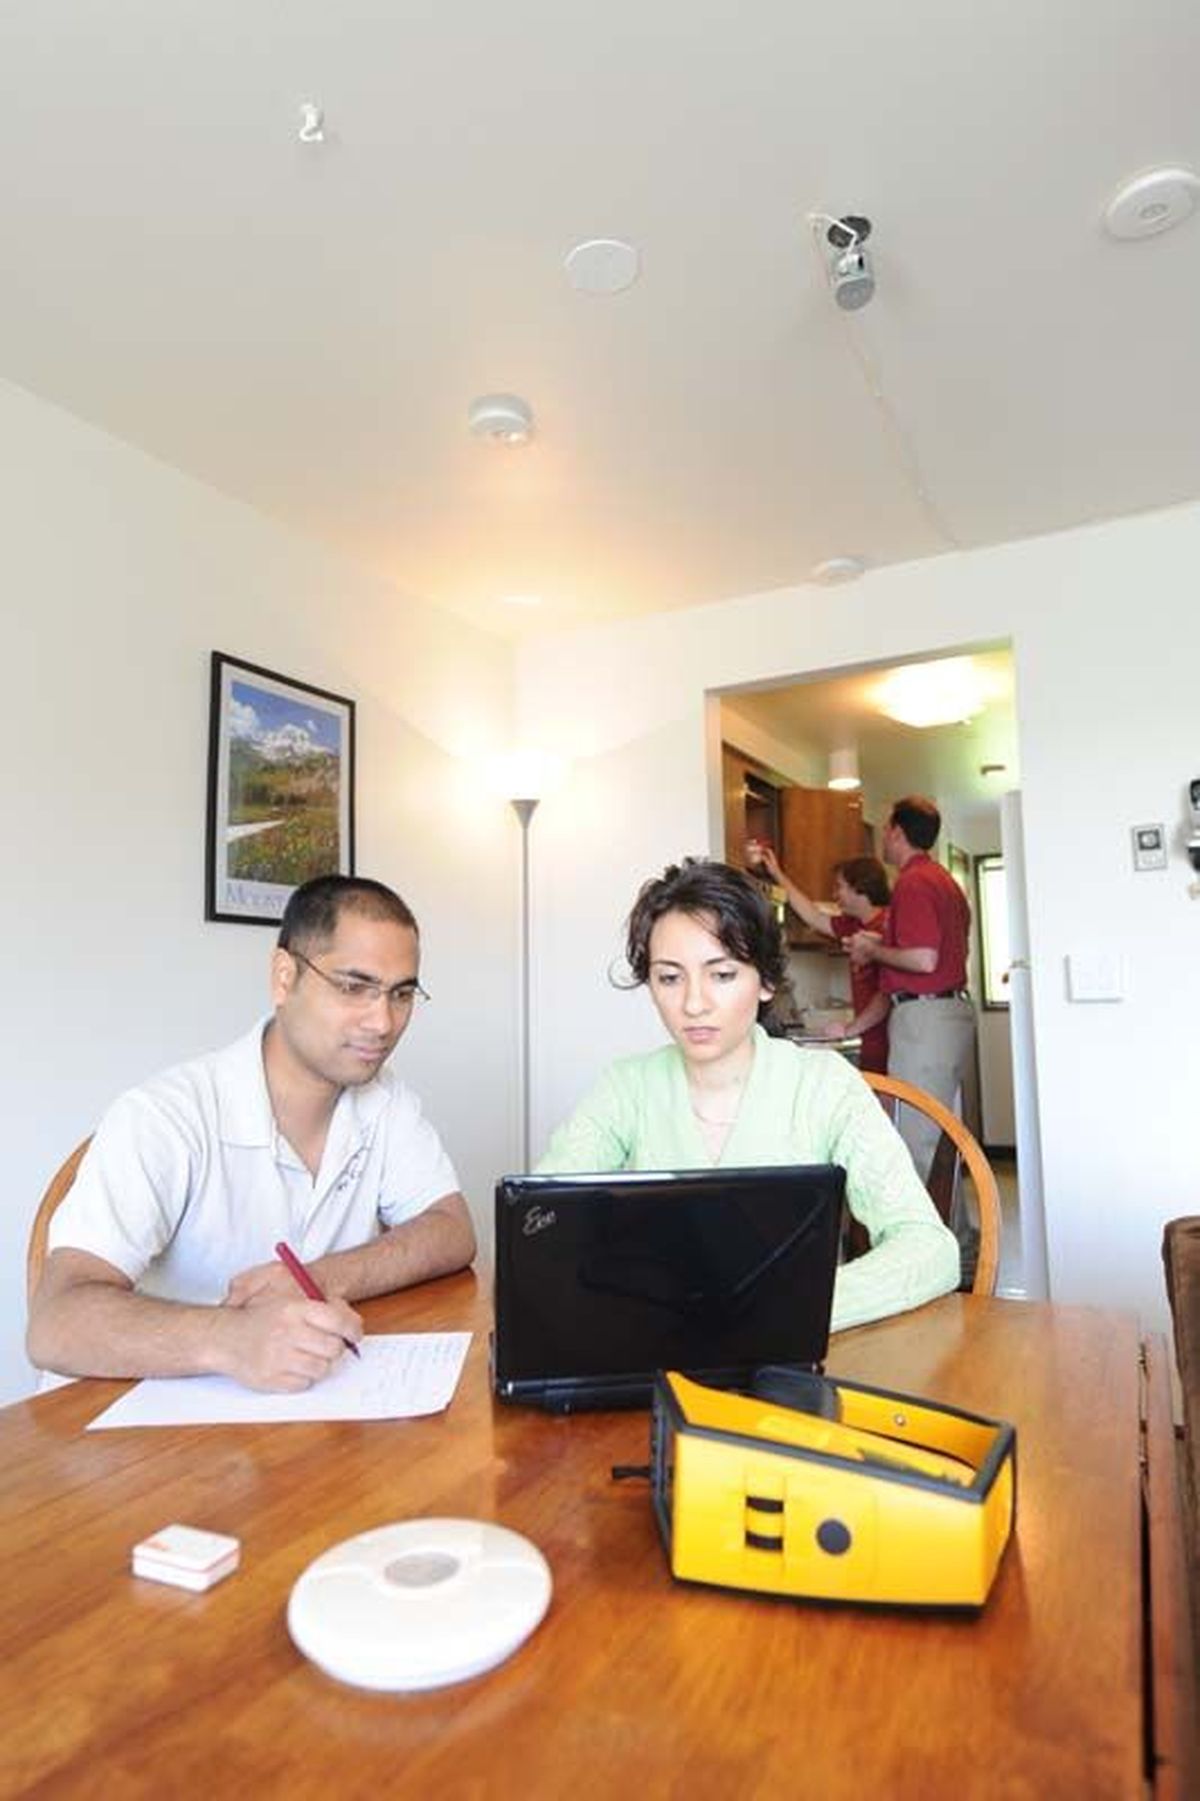 Former students in the WSU School of Electrical Engineering and Computer Science work to install smart devices in a campus test apartment at WSU in Pullman.  (Courtesy of WSU)